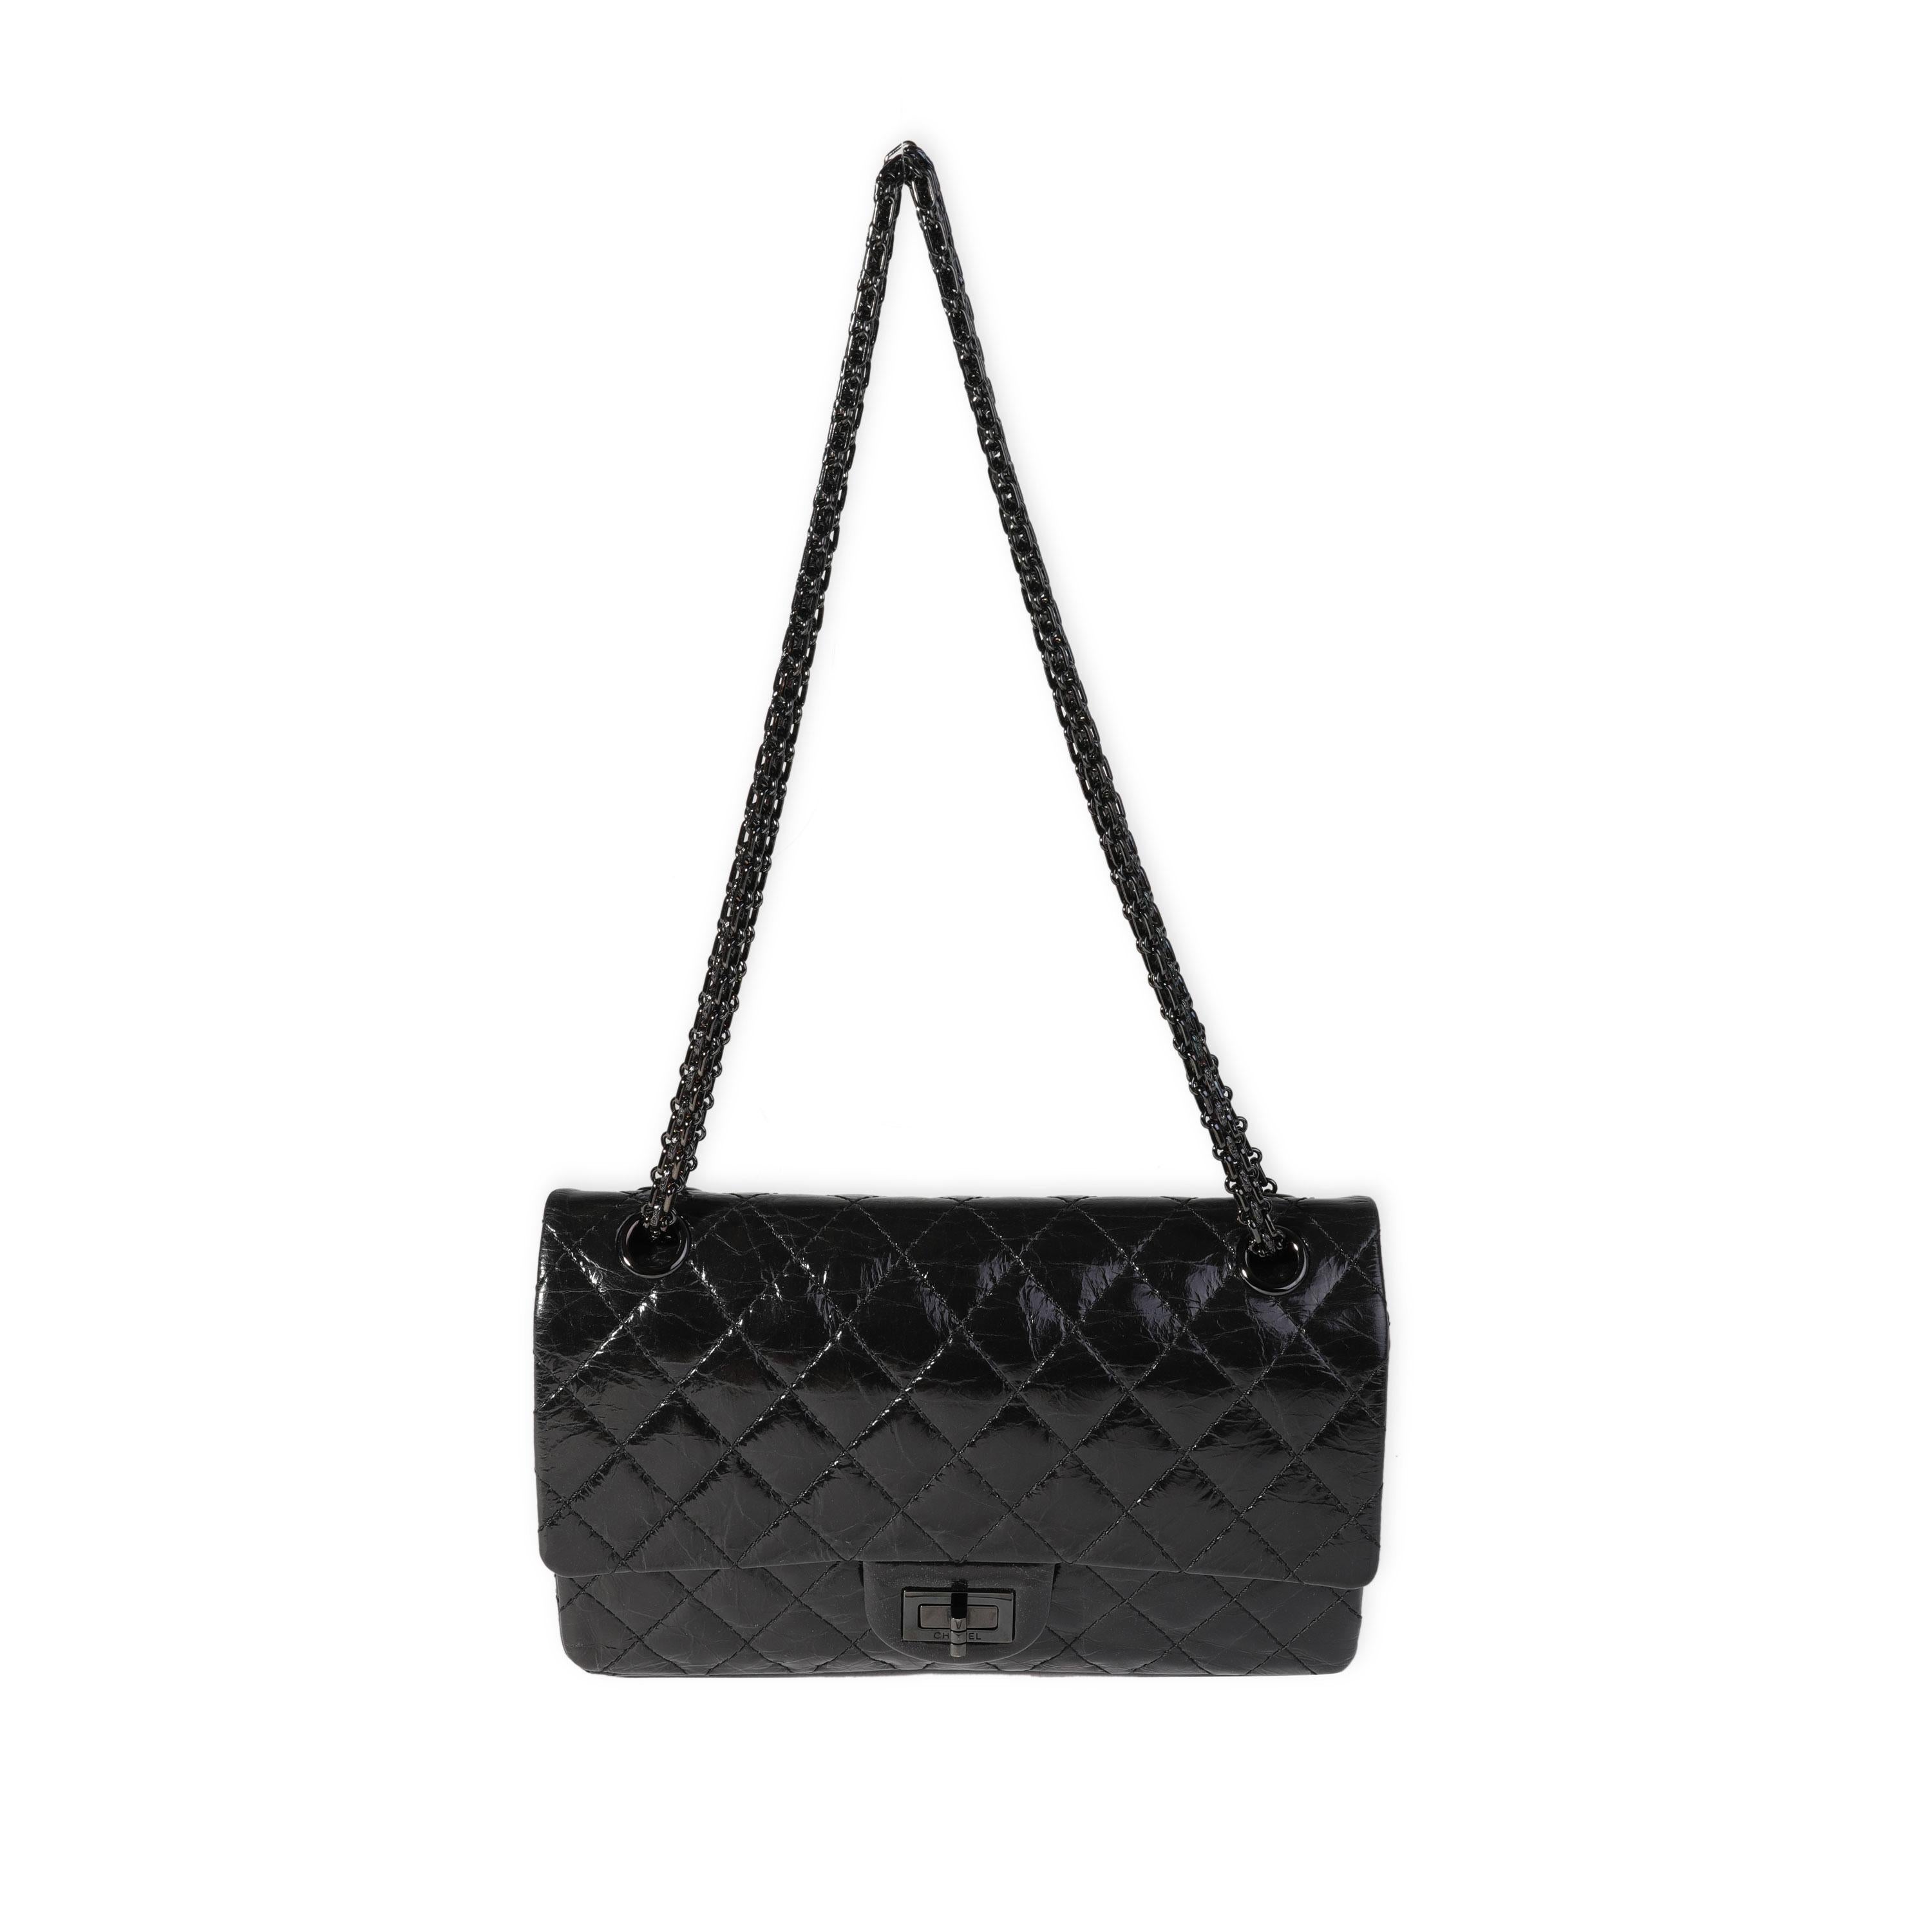 Listing Title: Chanel So Black Patent Crinkled Calfskin Reissue 2.55 225 Double Flap Bag
SKU: 121591
MSRP: 8800.00
Condition: Pre-owned 
Handbag Condition: Excellent
Condition Comments: Excellent Condition. Plastic to some hardware. Light scuffing